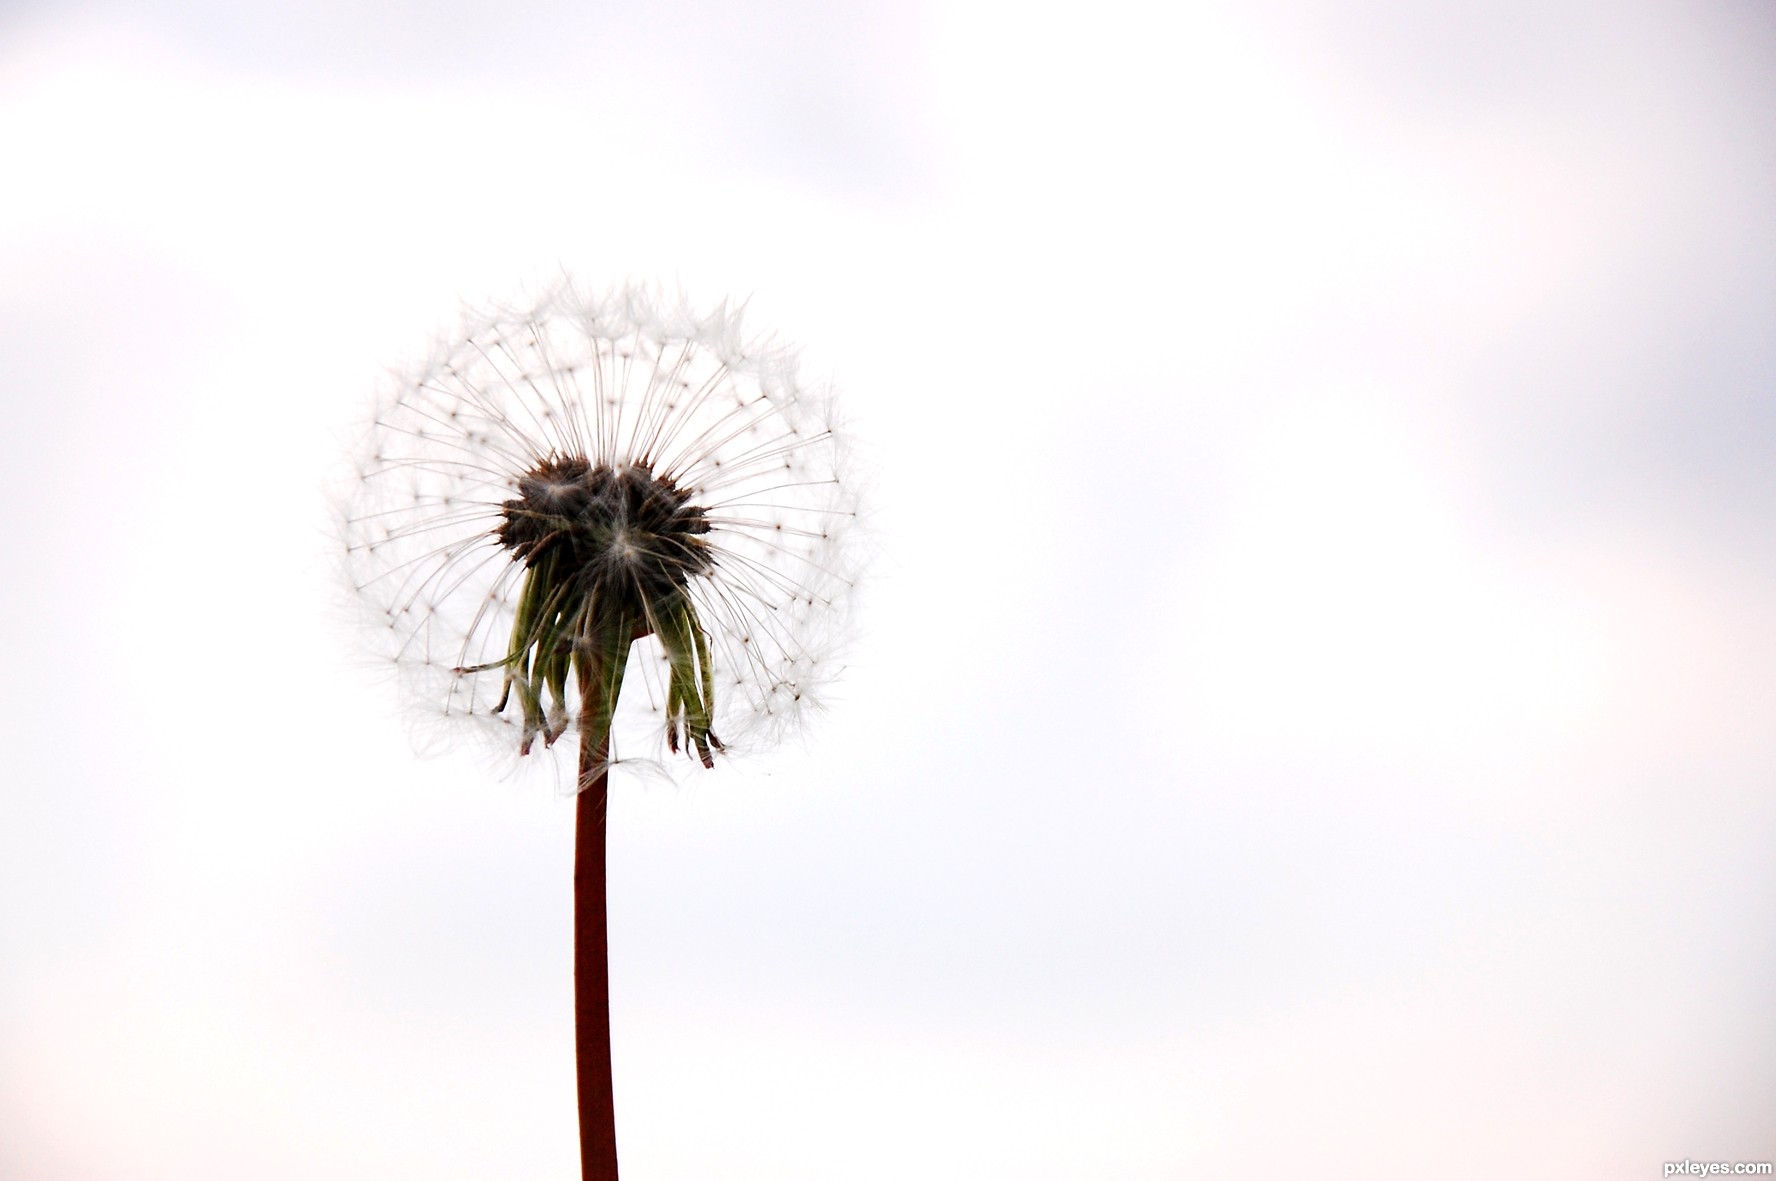 Dandelion picture, by Artifakts for: white photography contest ...